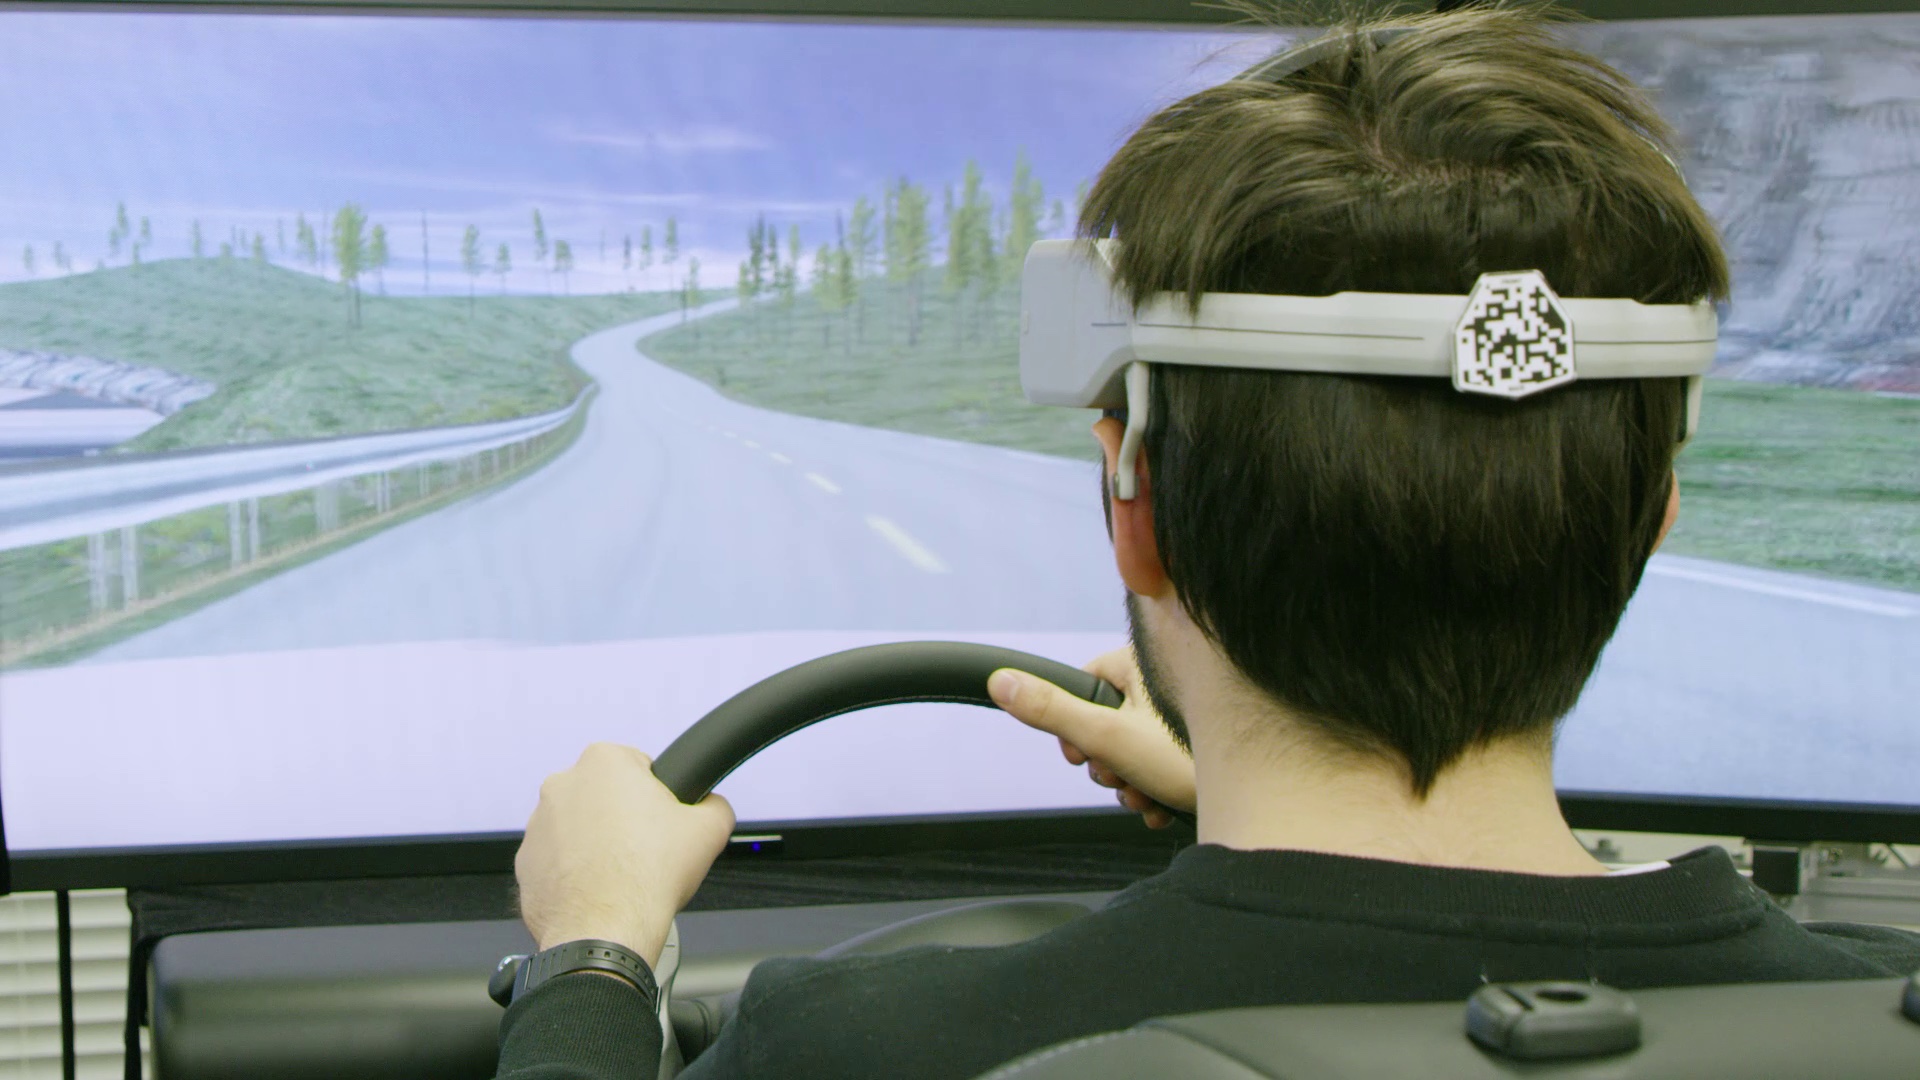 Nissan Brain-to-Vehicle Technology Allows Vehicle to Learn from the Driver